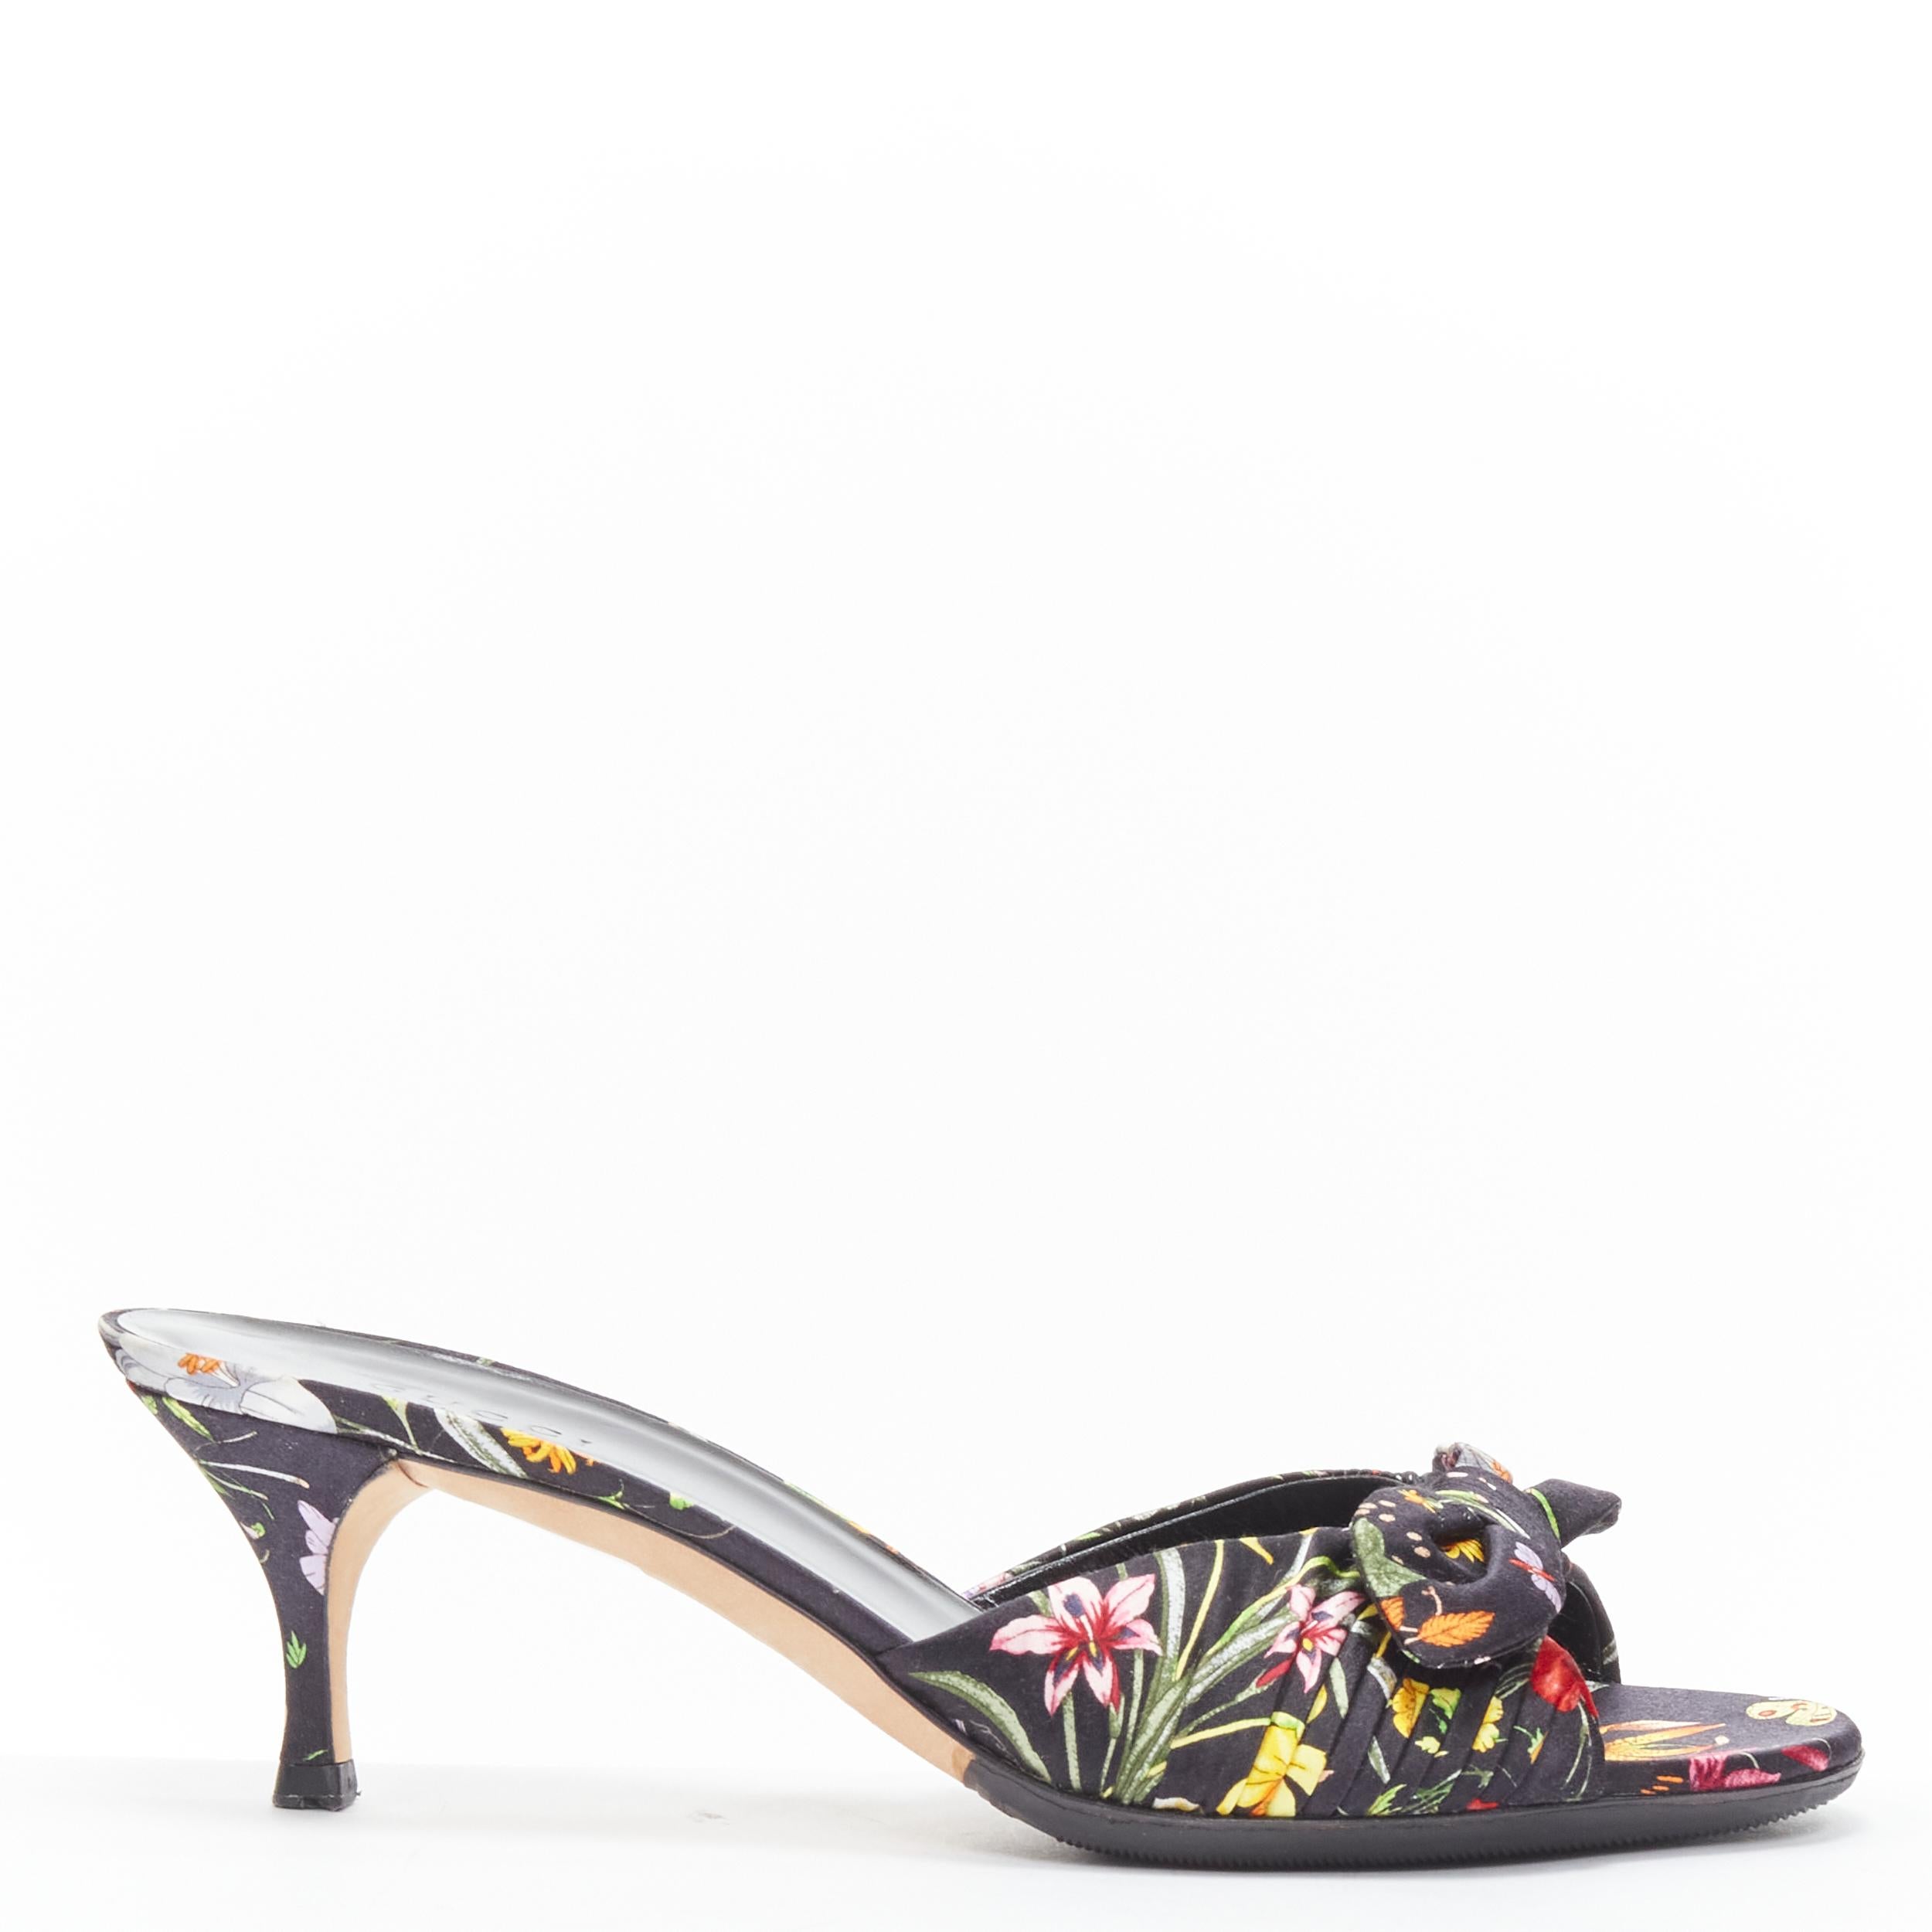 GUCCI Flora black floral print silk twist bow kitten heel mule sandals EU36 US6 
Reference: CELG/A00228 
Brand: Gucci 
Model: Floral mule 
Material: Silk 
Color: Black 
Pattern: Floral 
Extra Detail: Bow detail at toe. Open toe. 
Made in: Italy